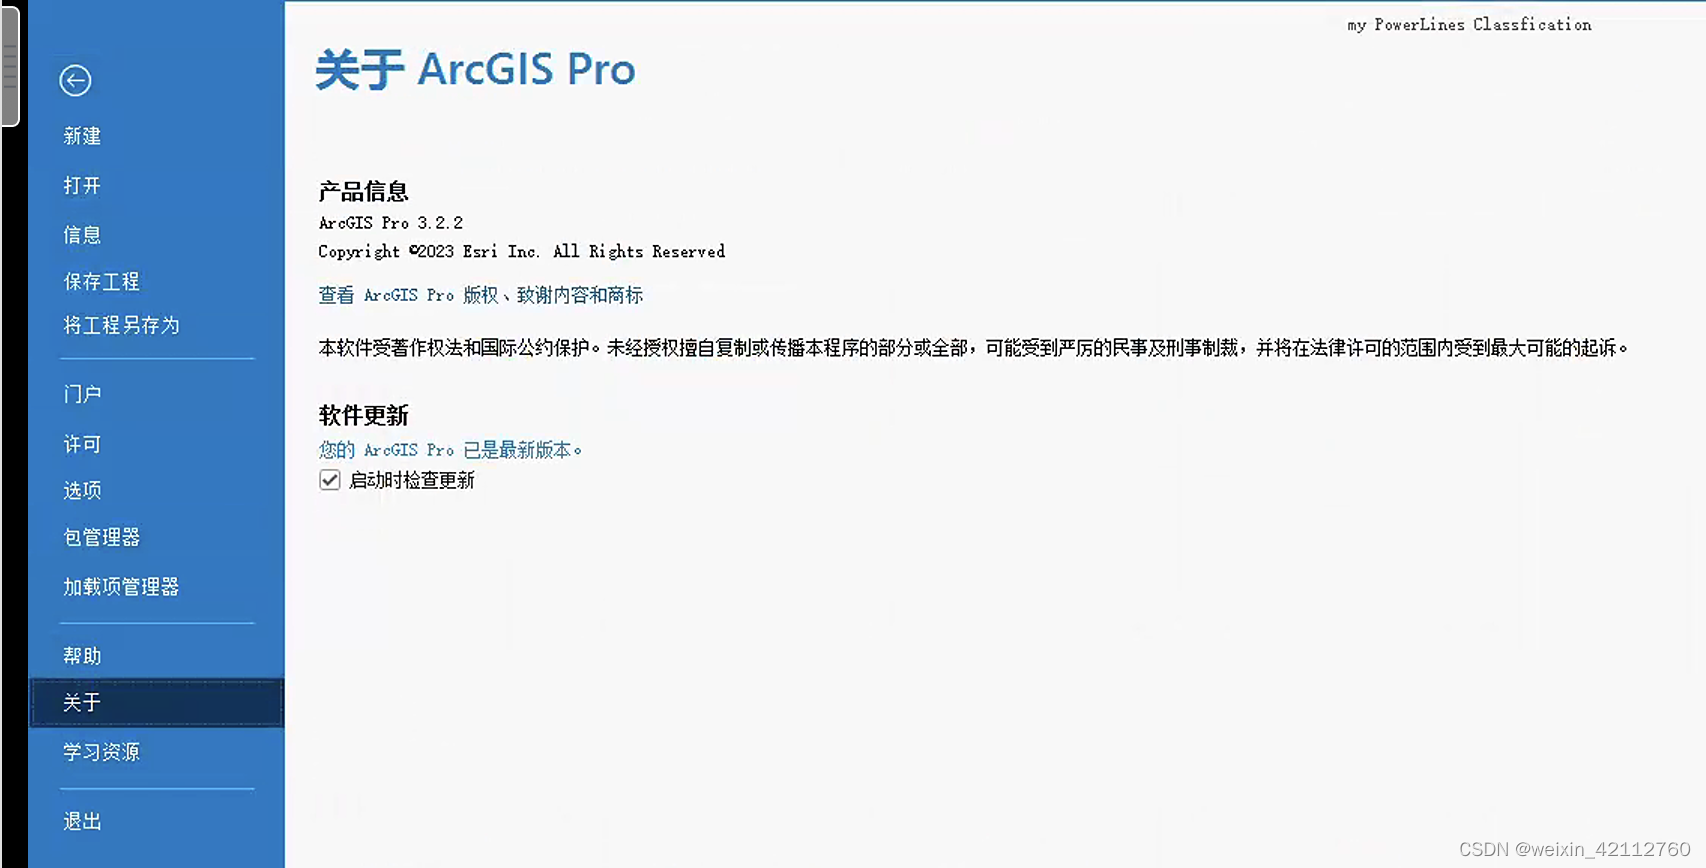 ARCGIS Pro<span style='color:red;'>踩</span><span style='color:red;'>坑</span><span style='color:red;'>及</span>解决<span style='color:red;'>方案</span>